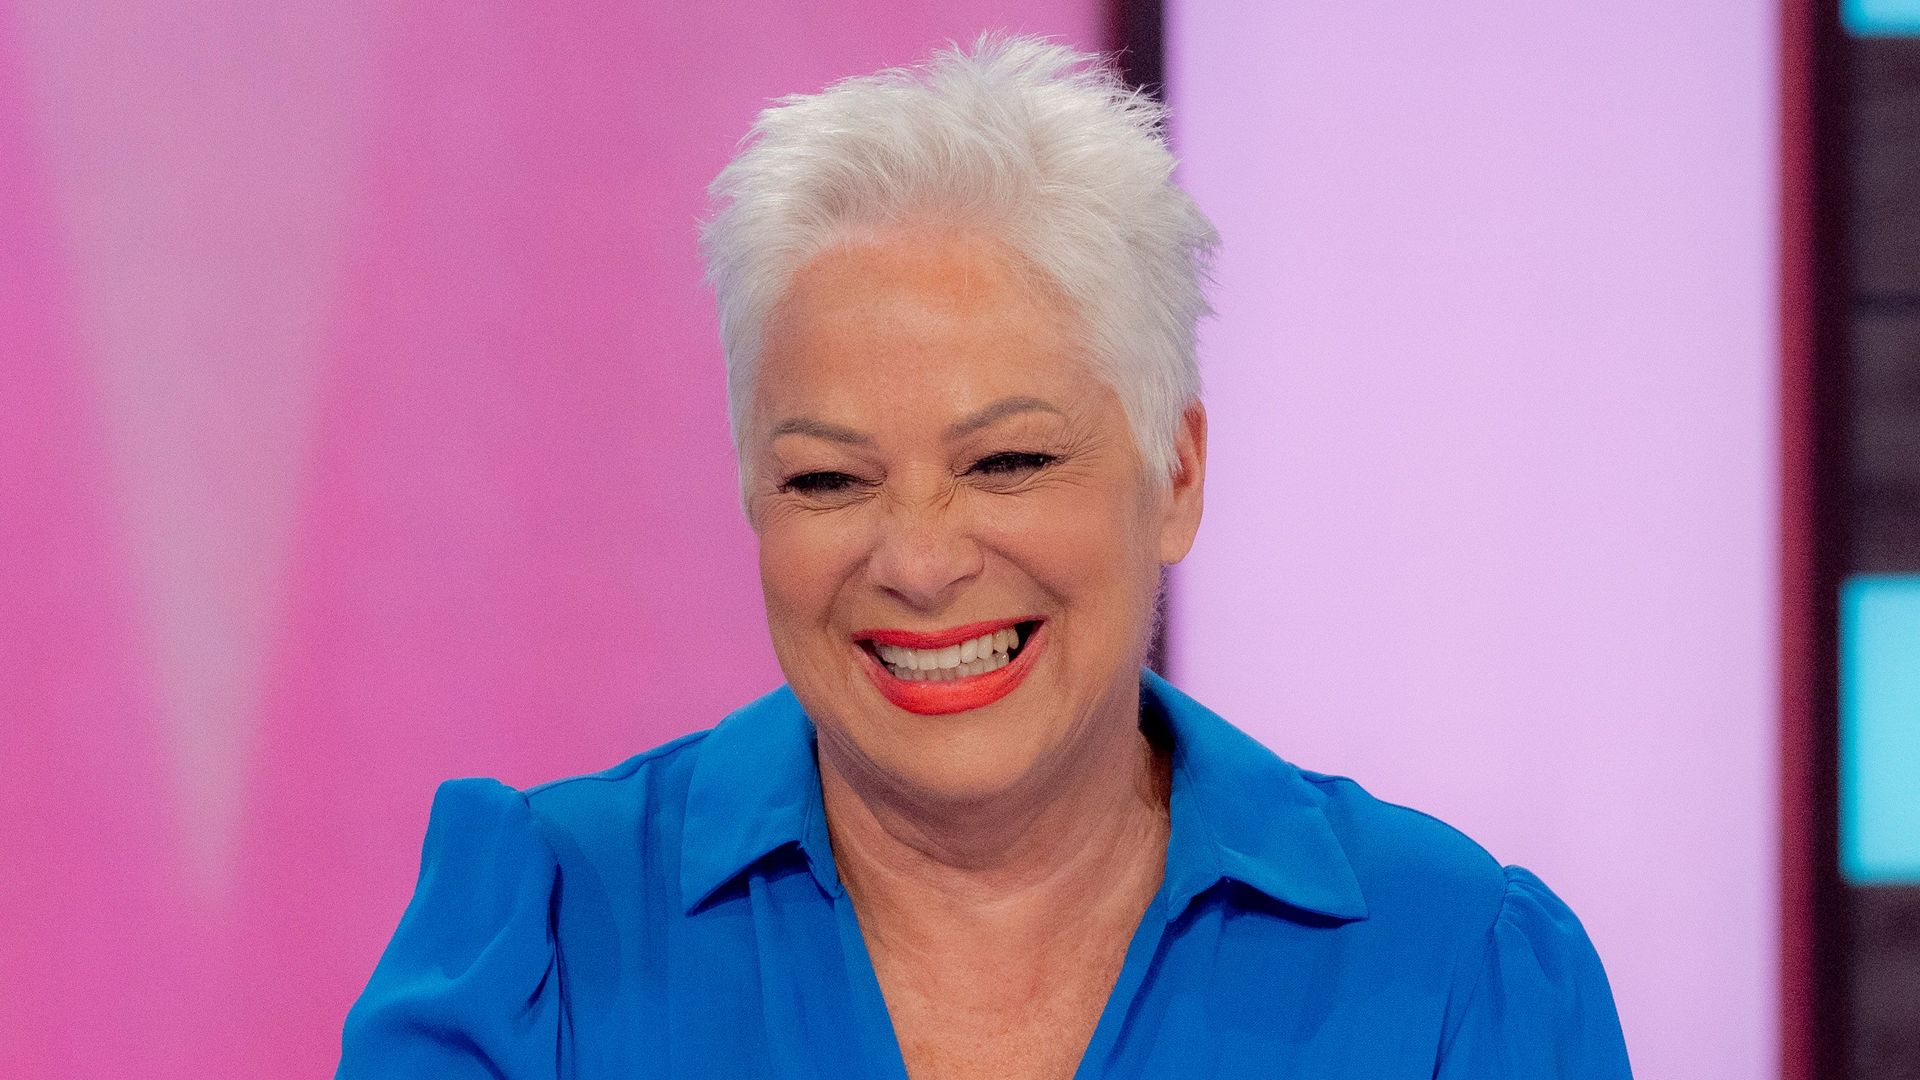 Denise Welch in a blue shirt